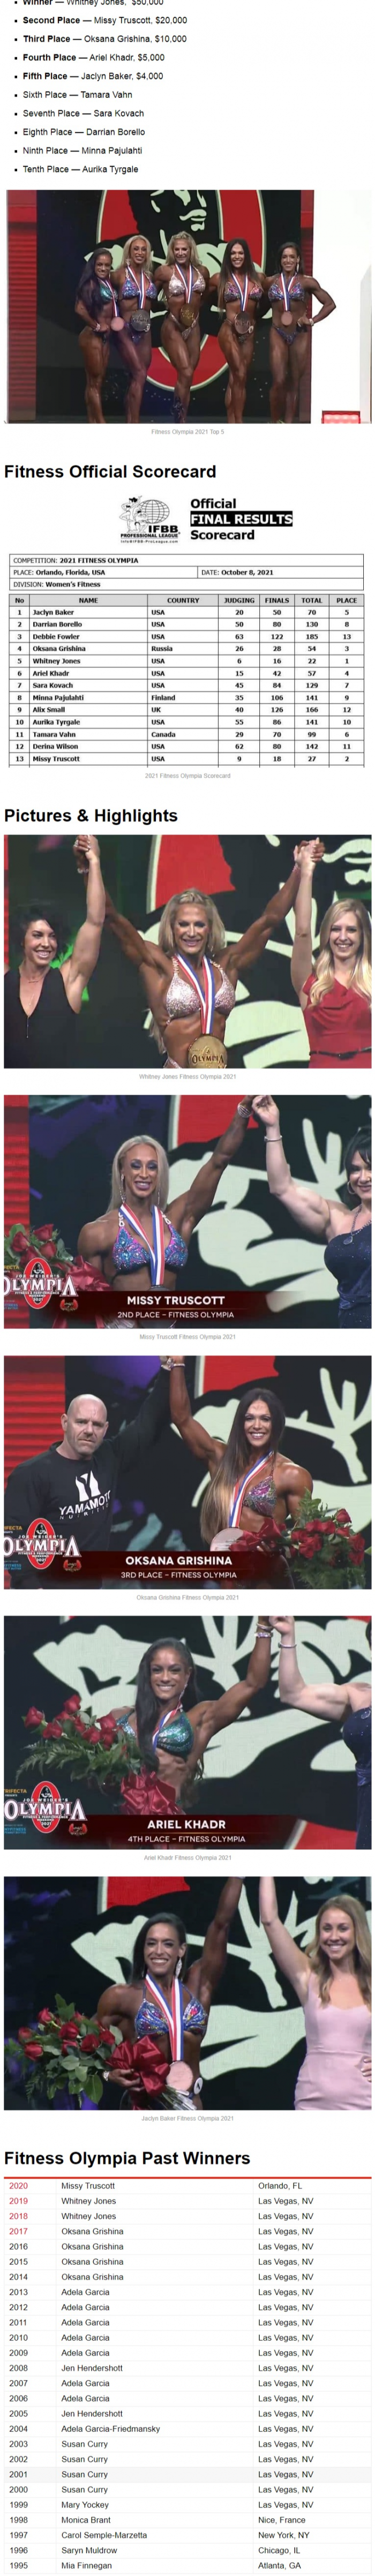 2021 Mr. Olympia Women’s Fitness Results and Prize Money